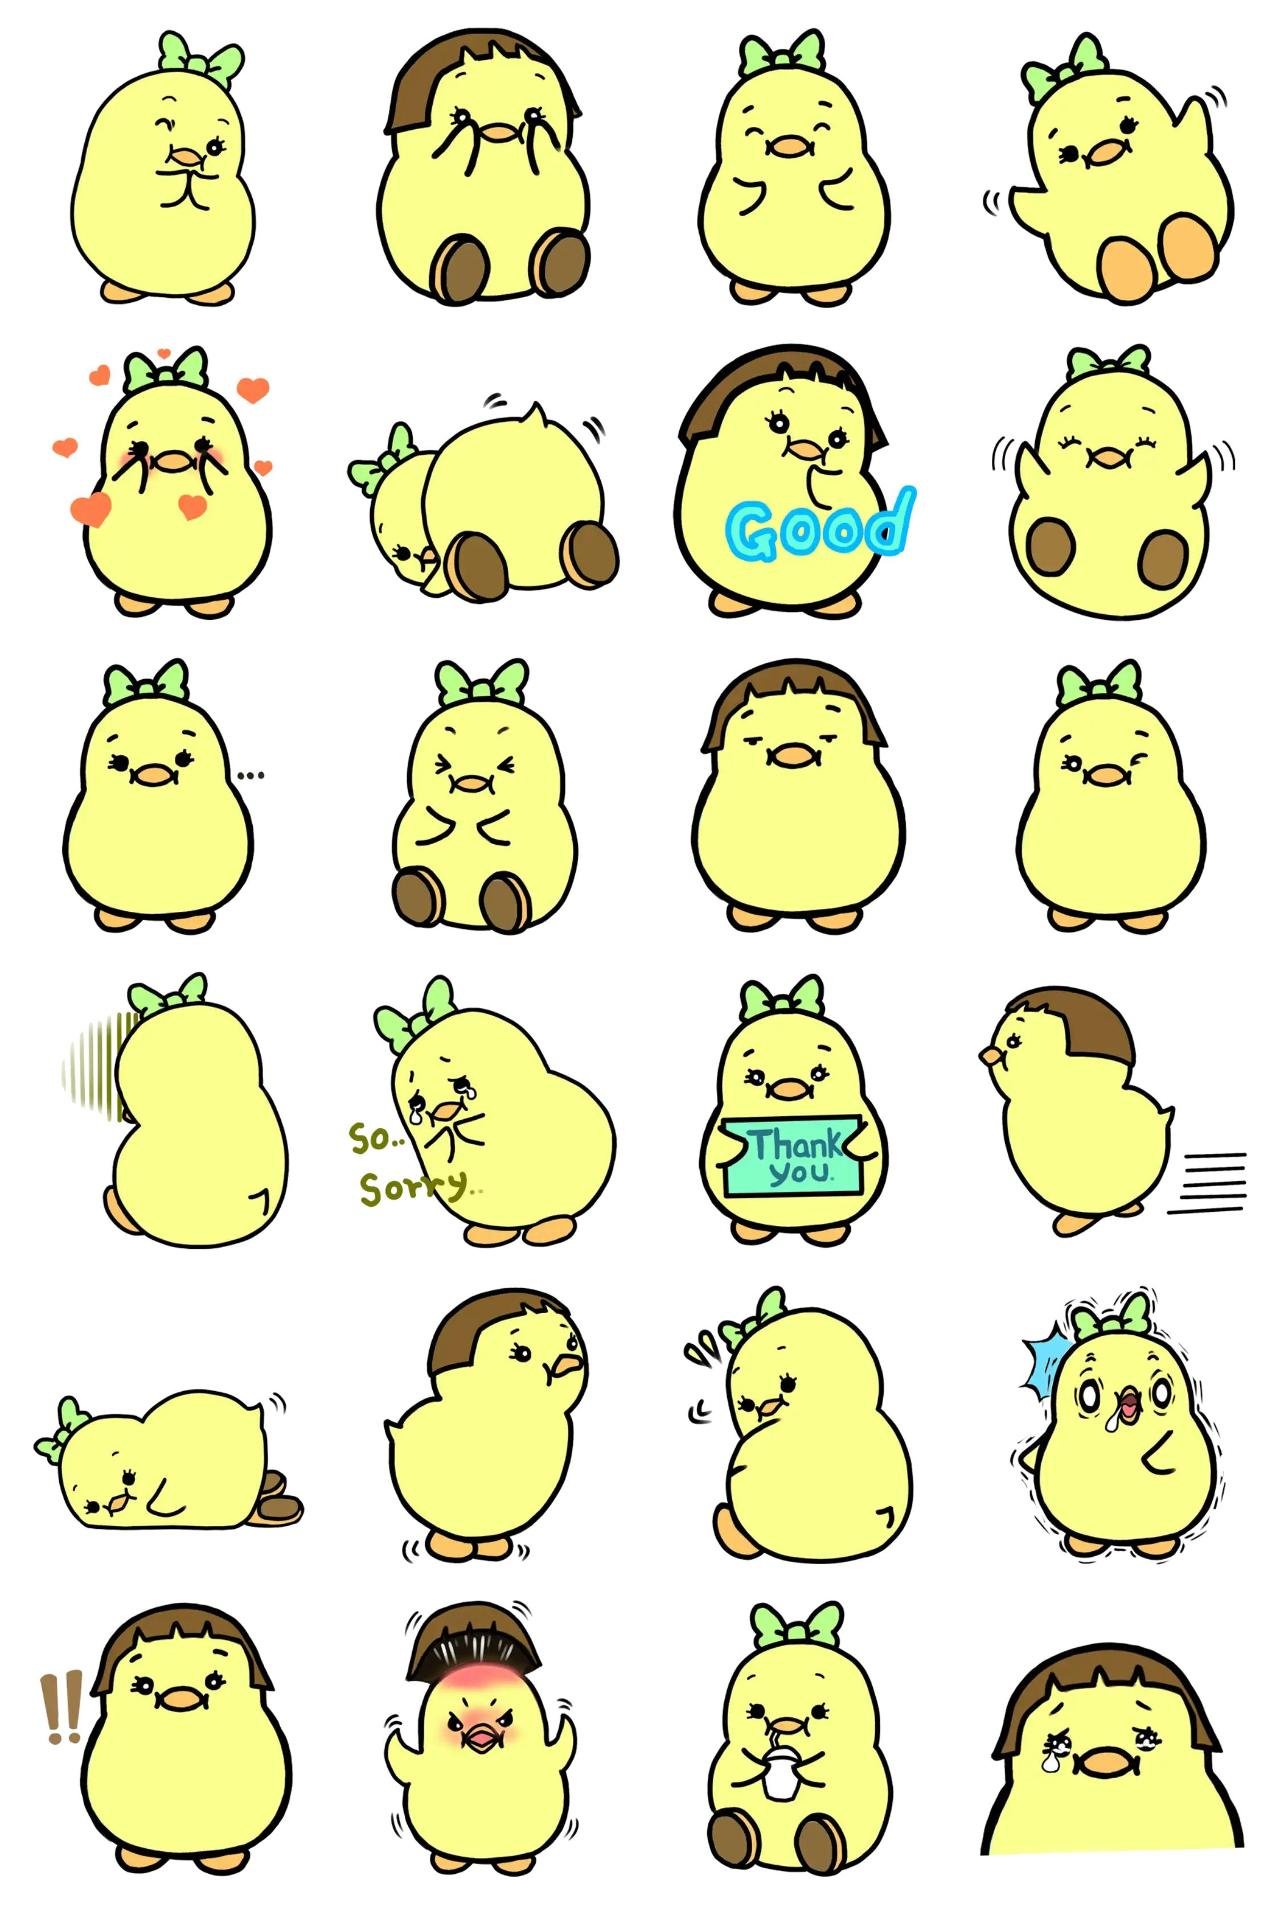 A fat chick Ari Animals sticker pack for Whatsapp, Telegram, Signal, and others chatting and message apps